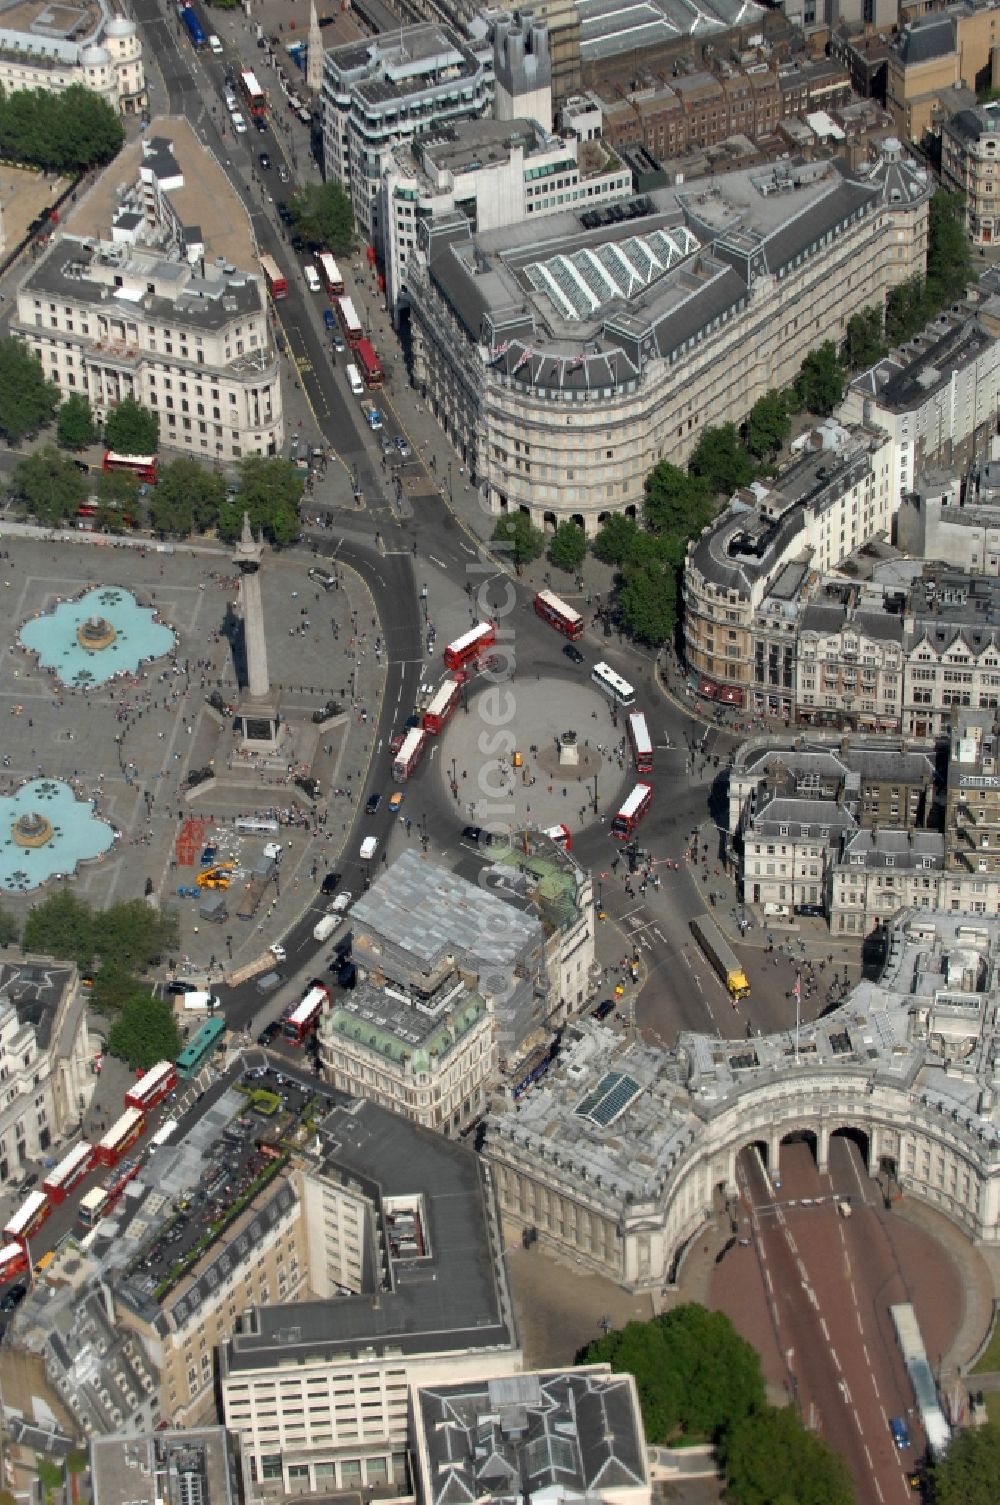 Aerial image London - Sight on tourist attraction and central meeting point for visitors in London: The urban place Trafalgar Square with the nelson column and fountains is closely connected with British history